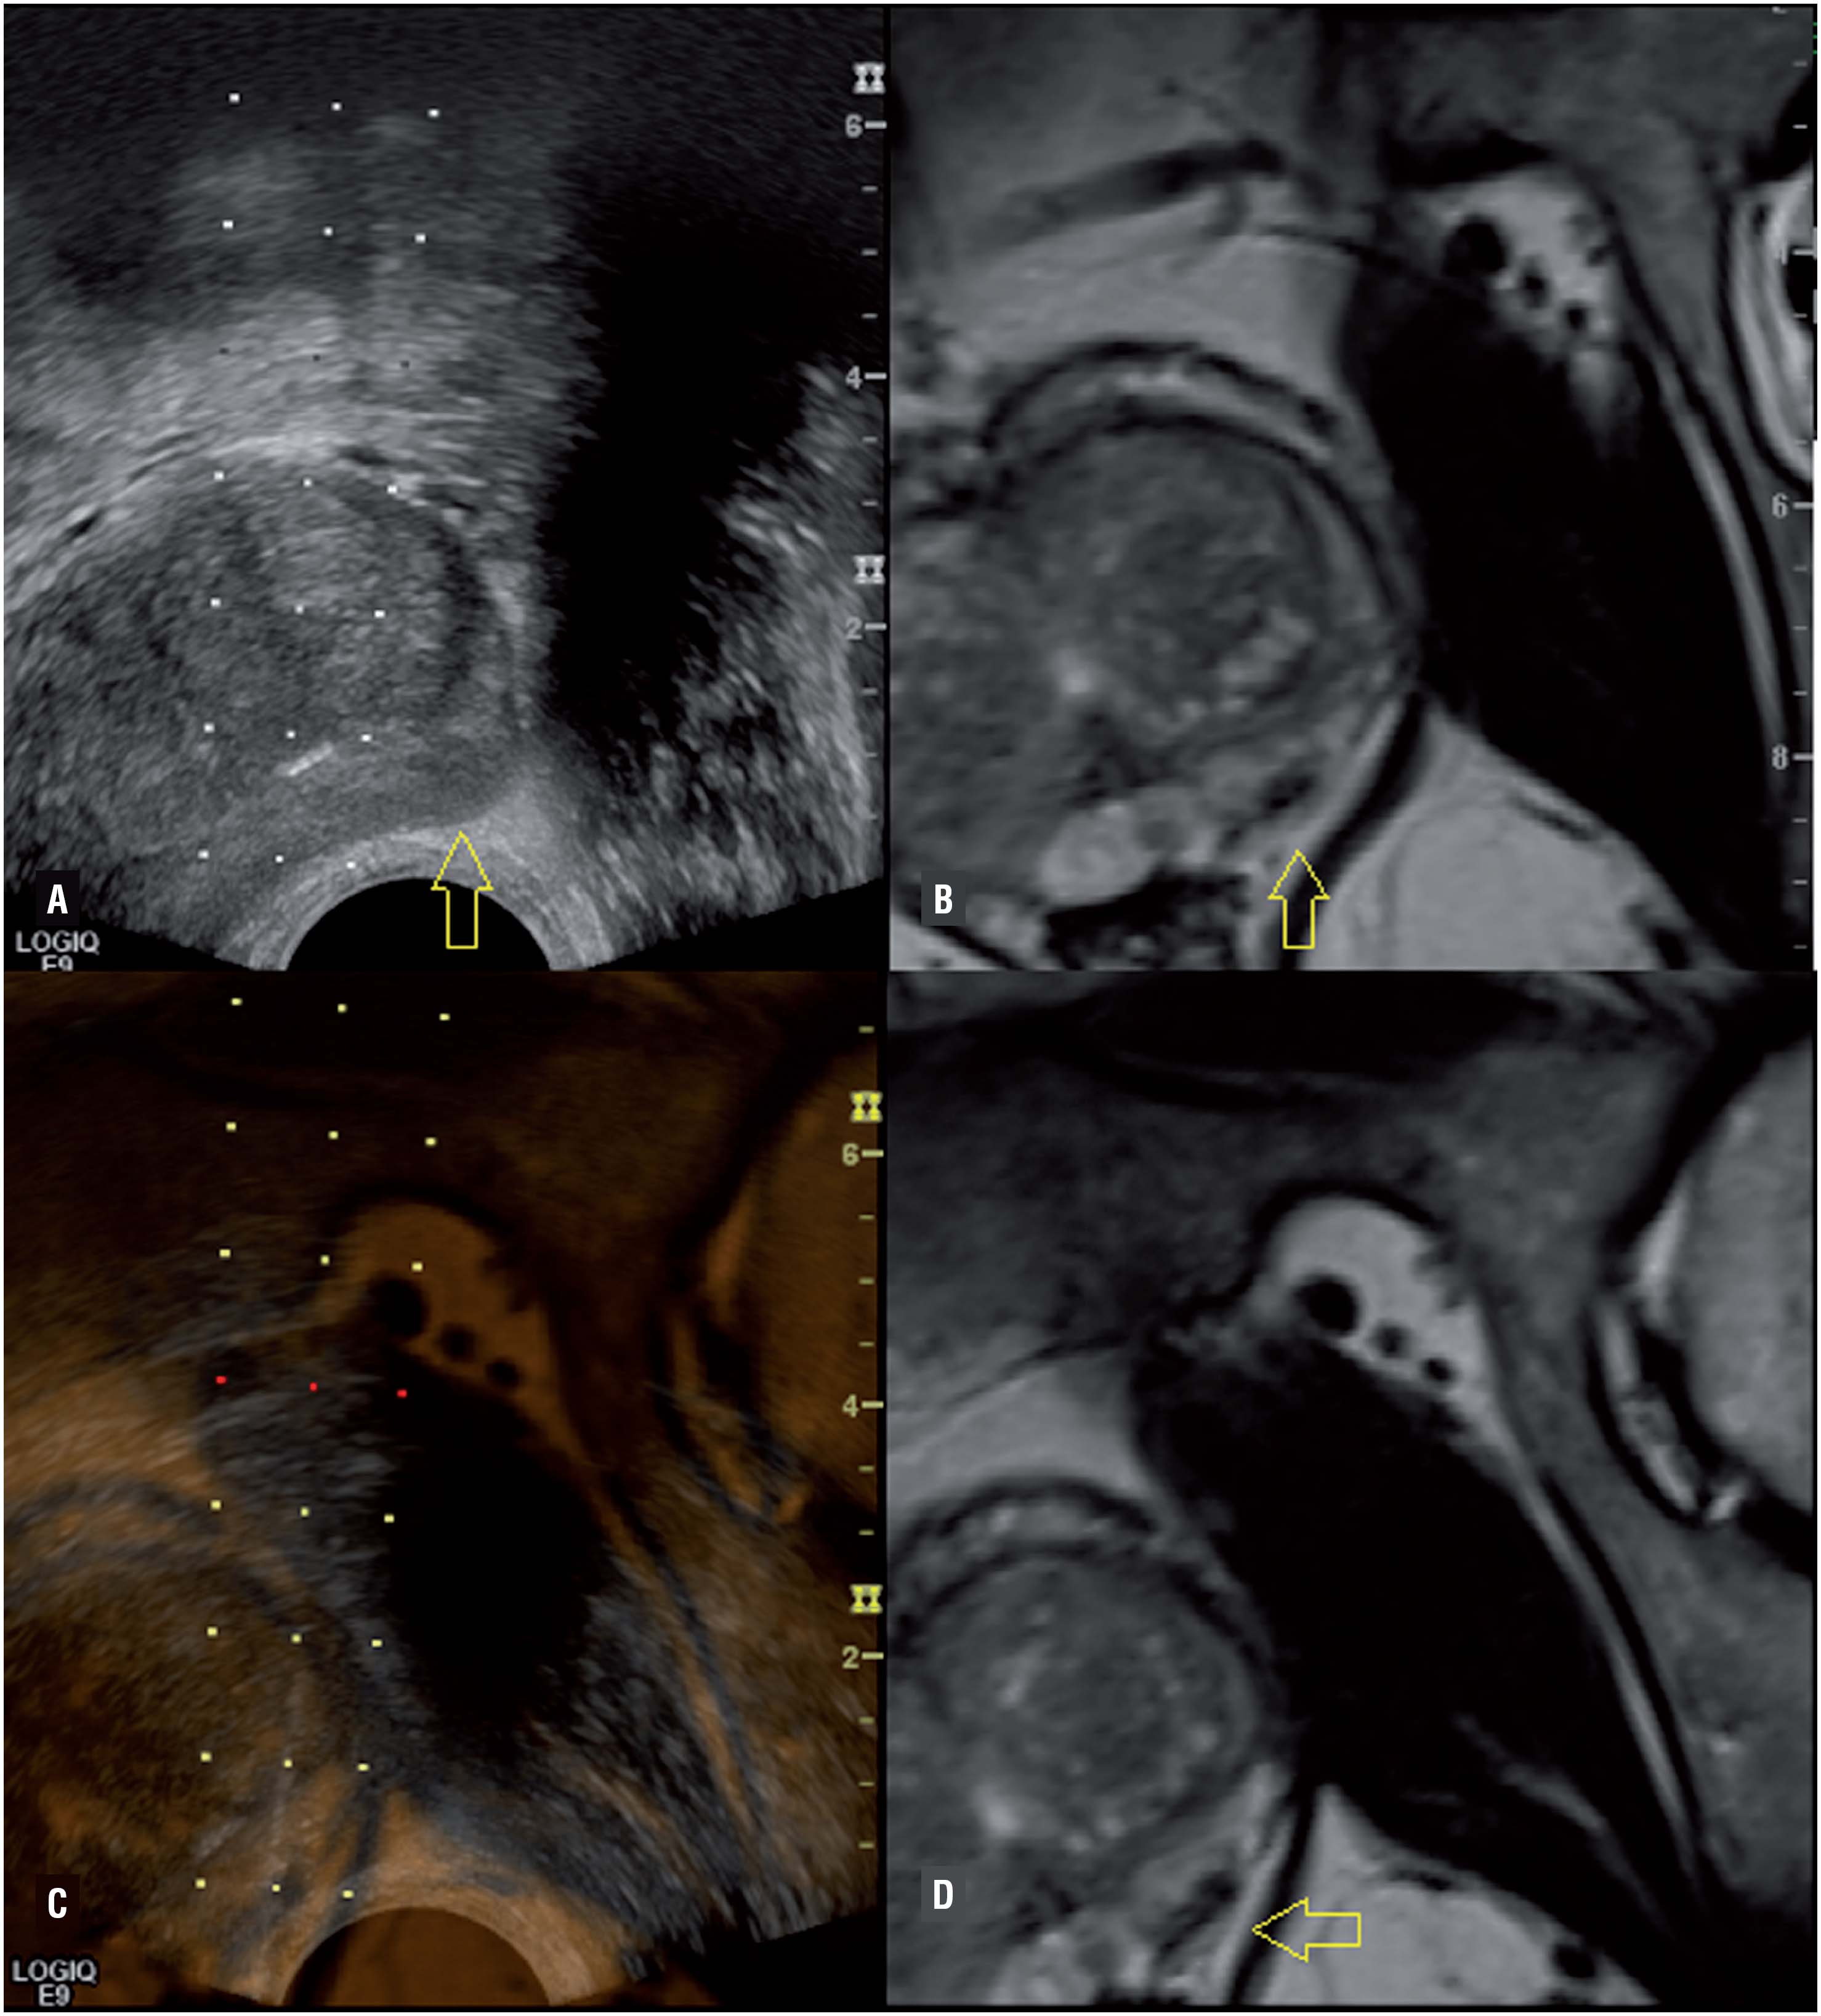 3T MRI image of the prostate